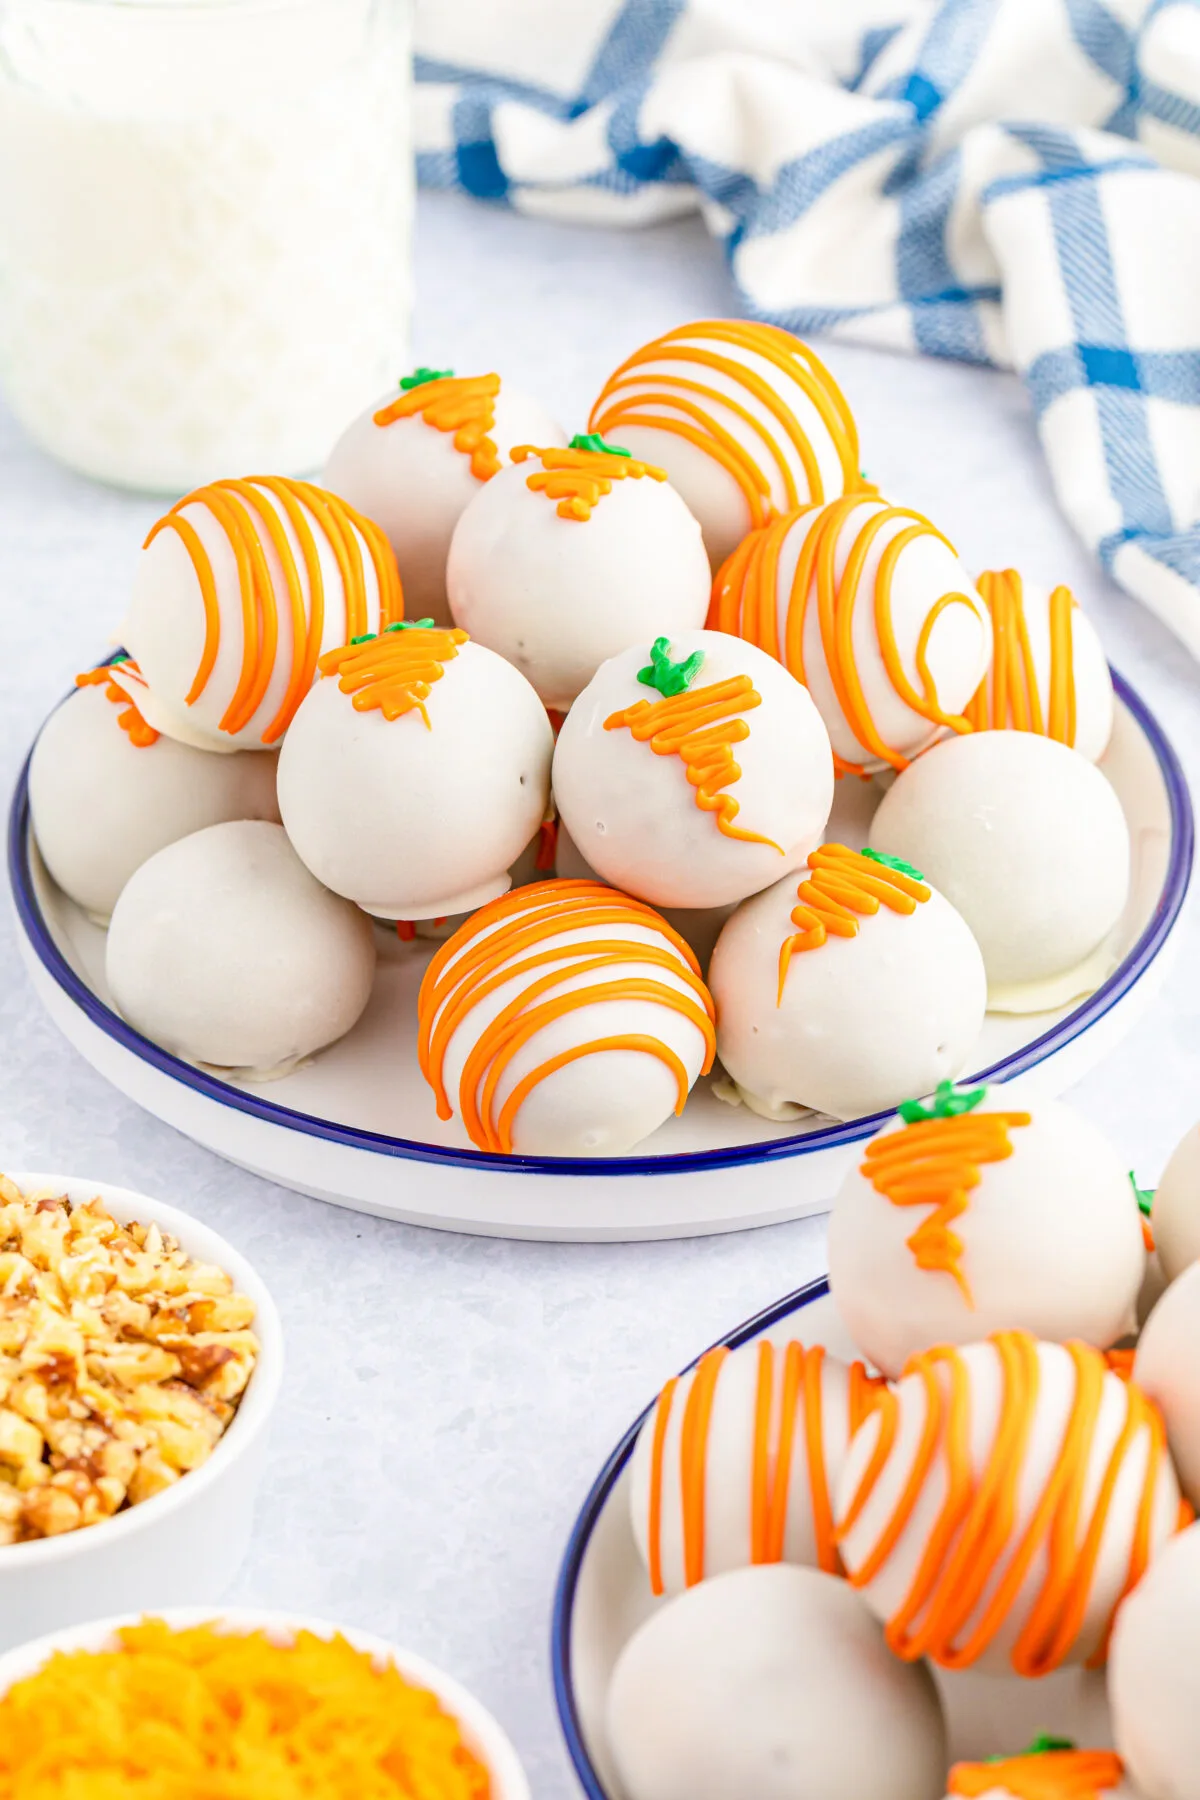 A blend of carrot cake mix, cream cheese, walnuts and white chocolate - these Carrot Cake Cheesecake Bites are a twist on classic carrot cake!